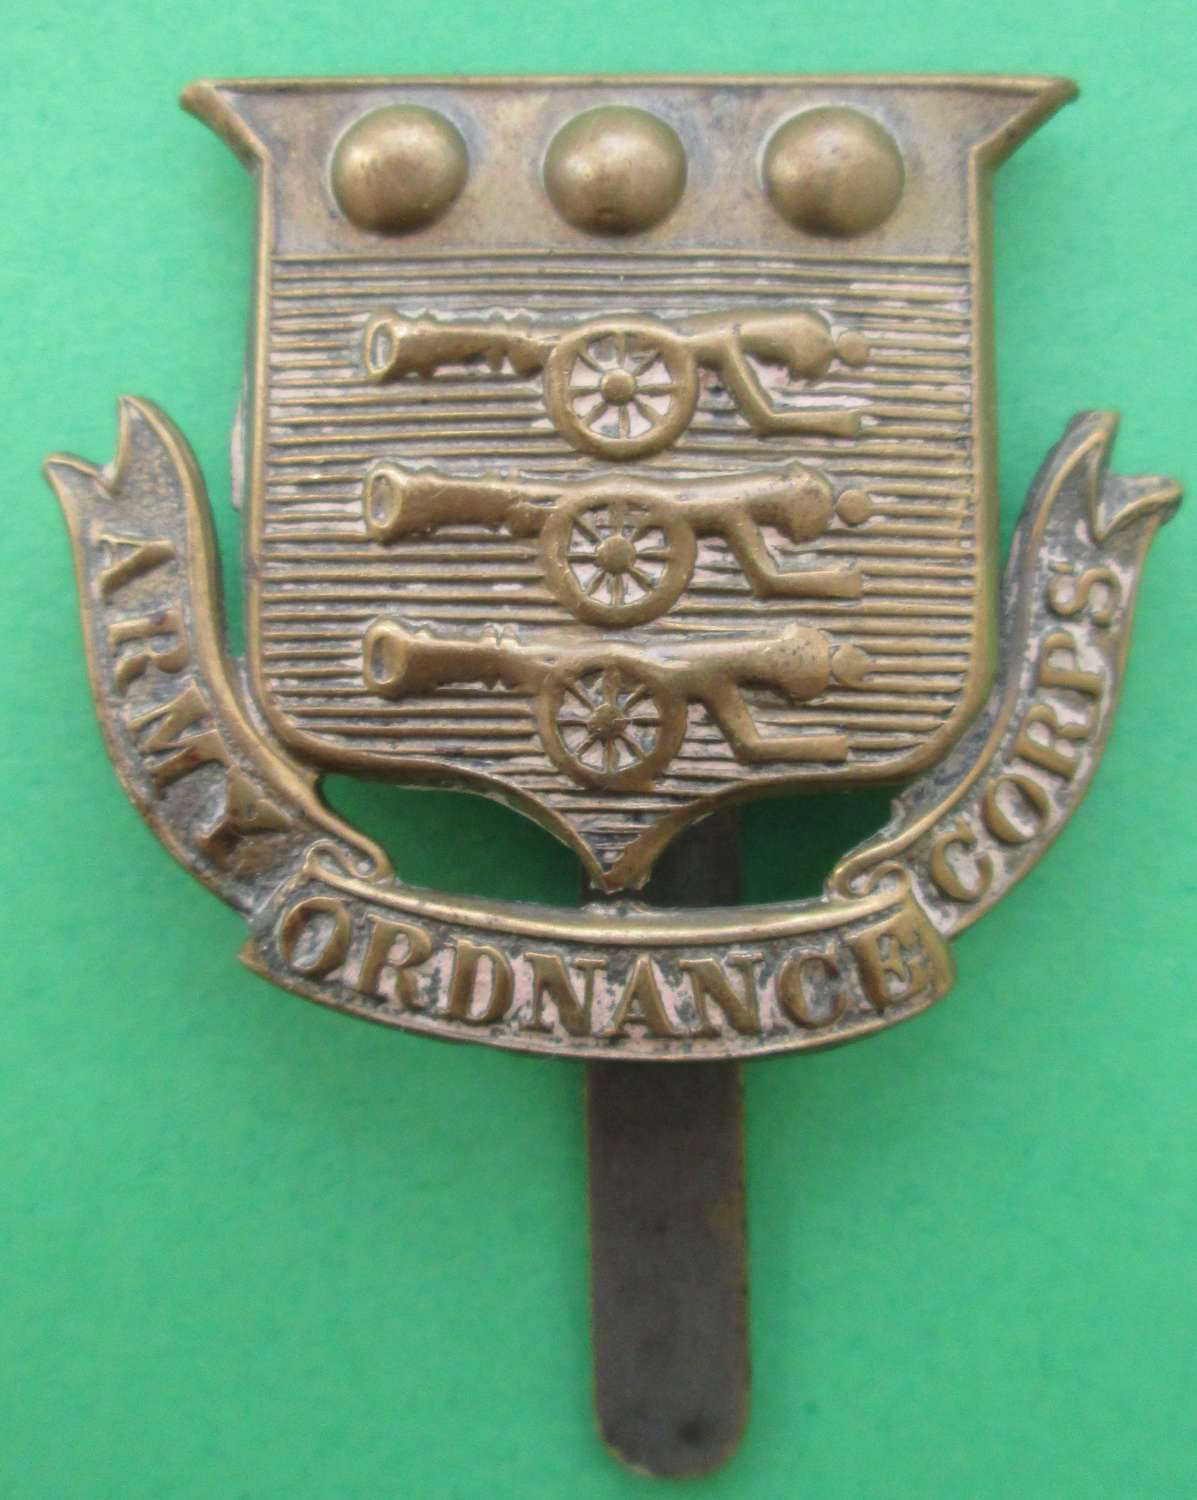 A PRE 1918 ARMY ORDNANCE CORPS CAP BADGE OR'S EXAMPLE